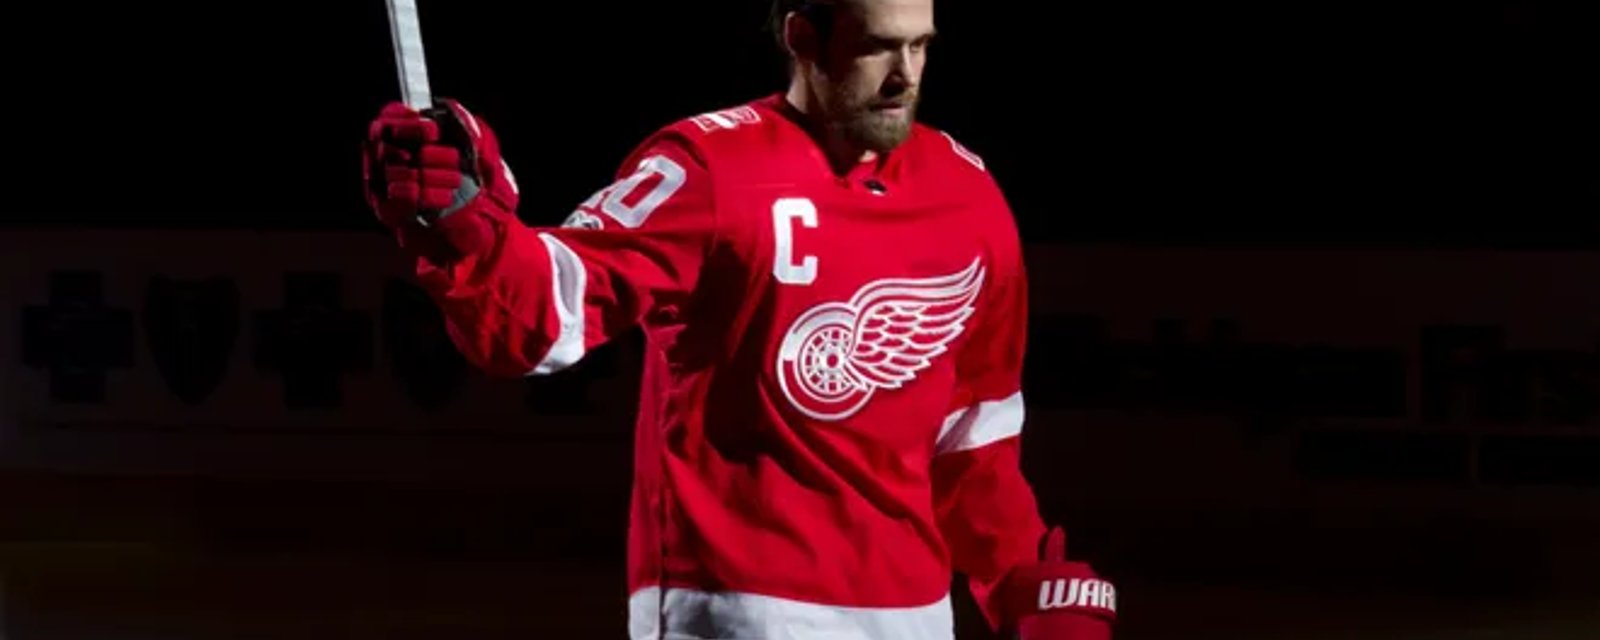 Henrik Zetterberg won't be making major career move with Red Wings 